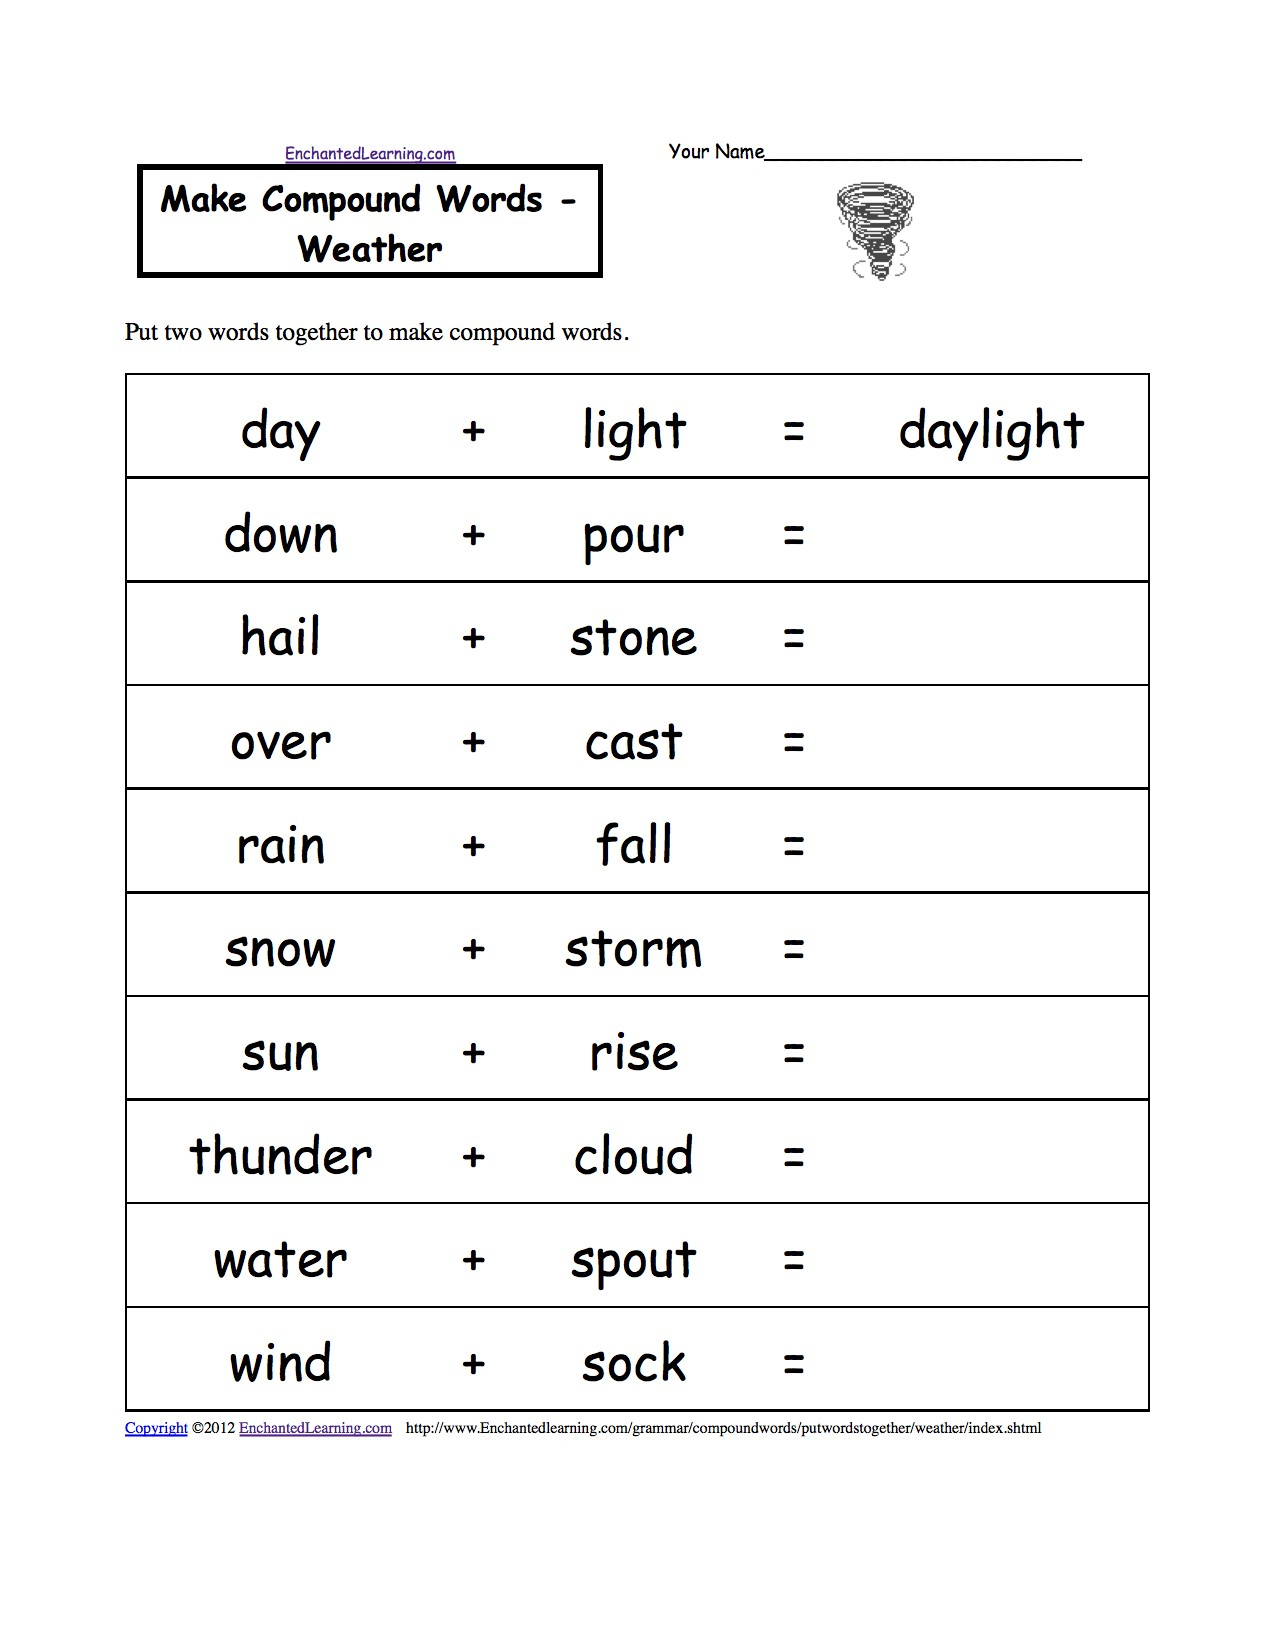 Free Printable Science Worksheets For 2Nd Grade – Worksheet Template - Free Printable Science Worksheets For 2Nd Grade